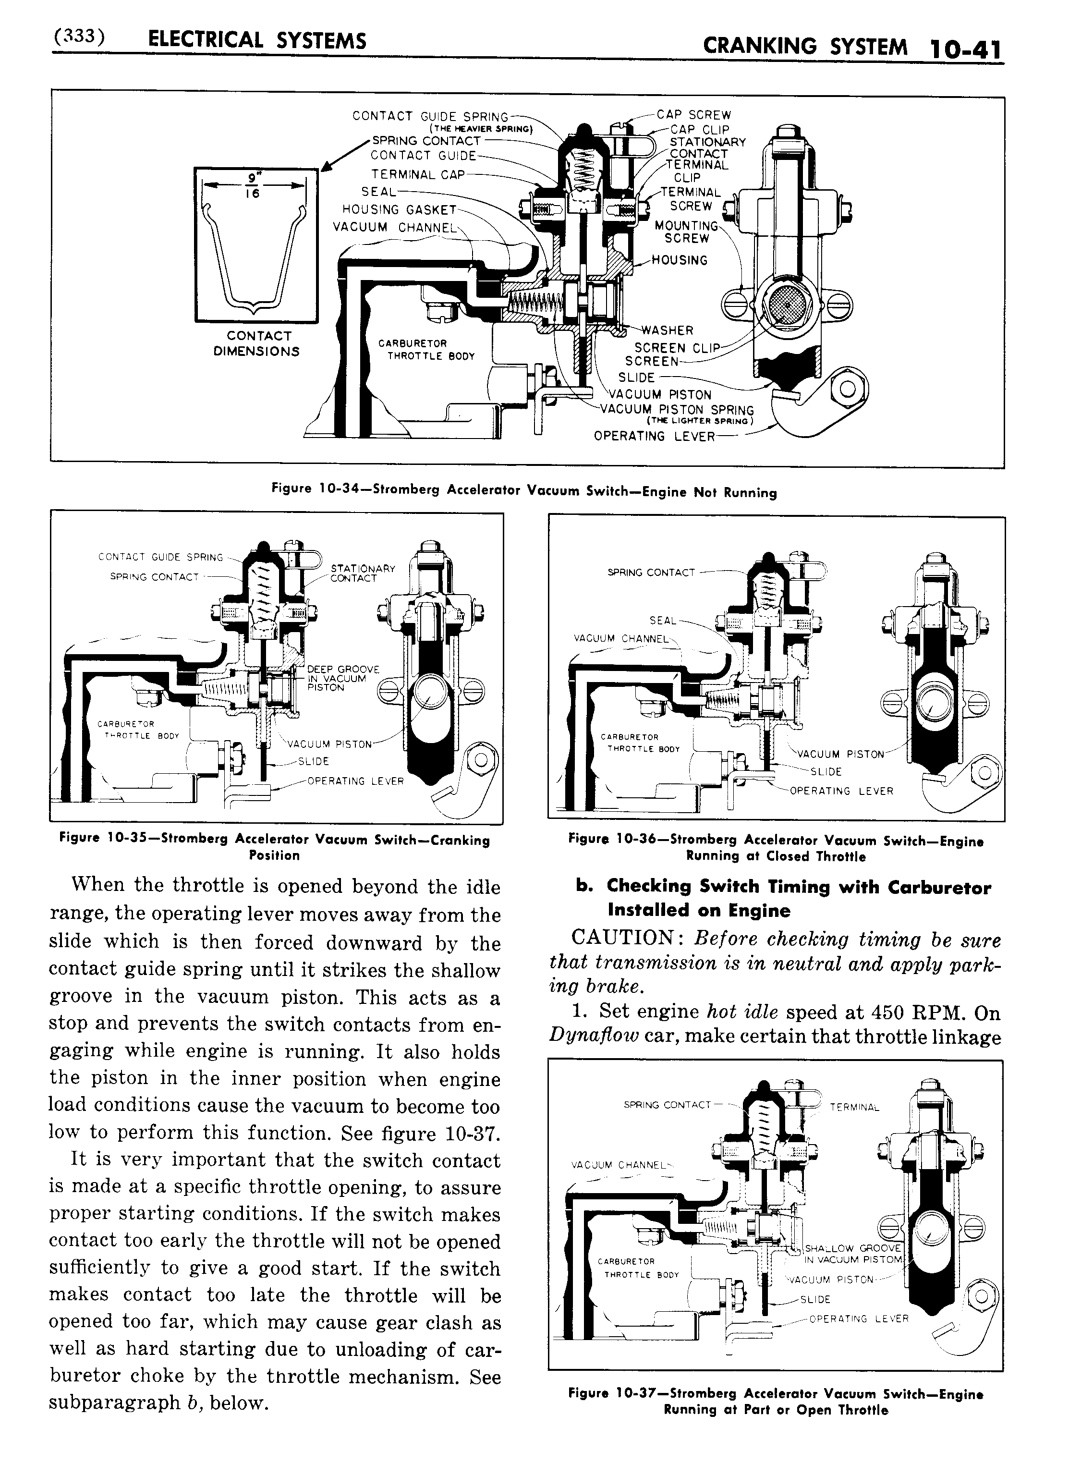 n_11 1951 Buick Shop Manual - Electrical Systems-041-041.jpg